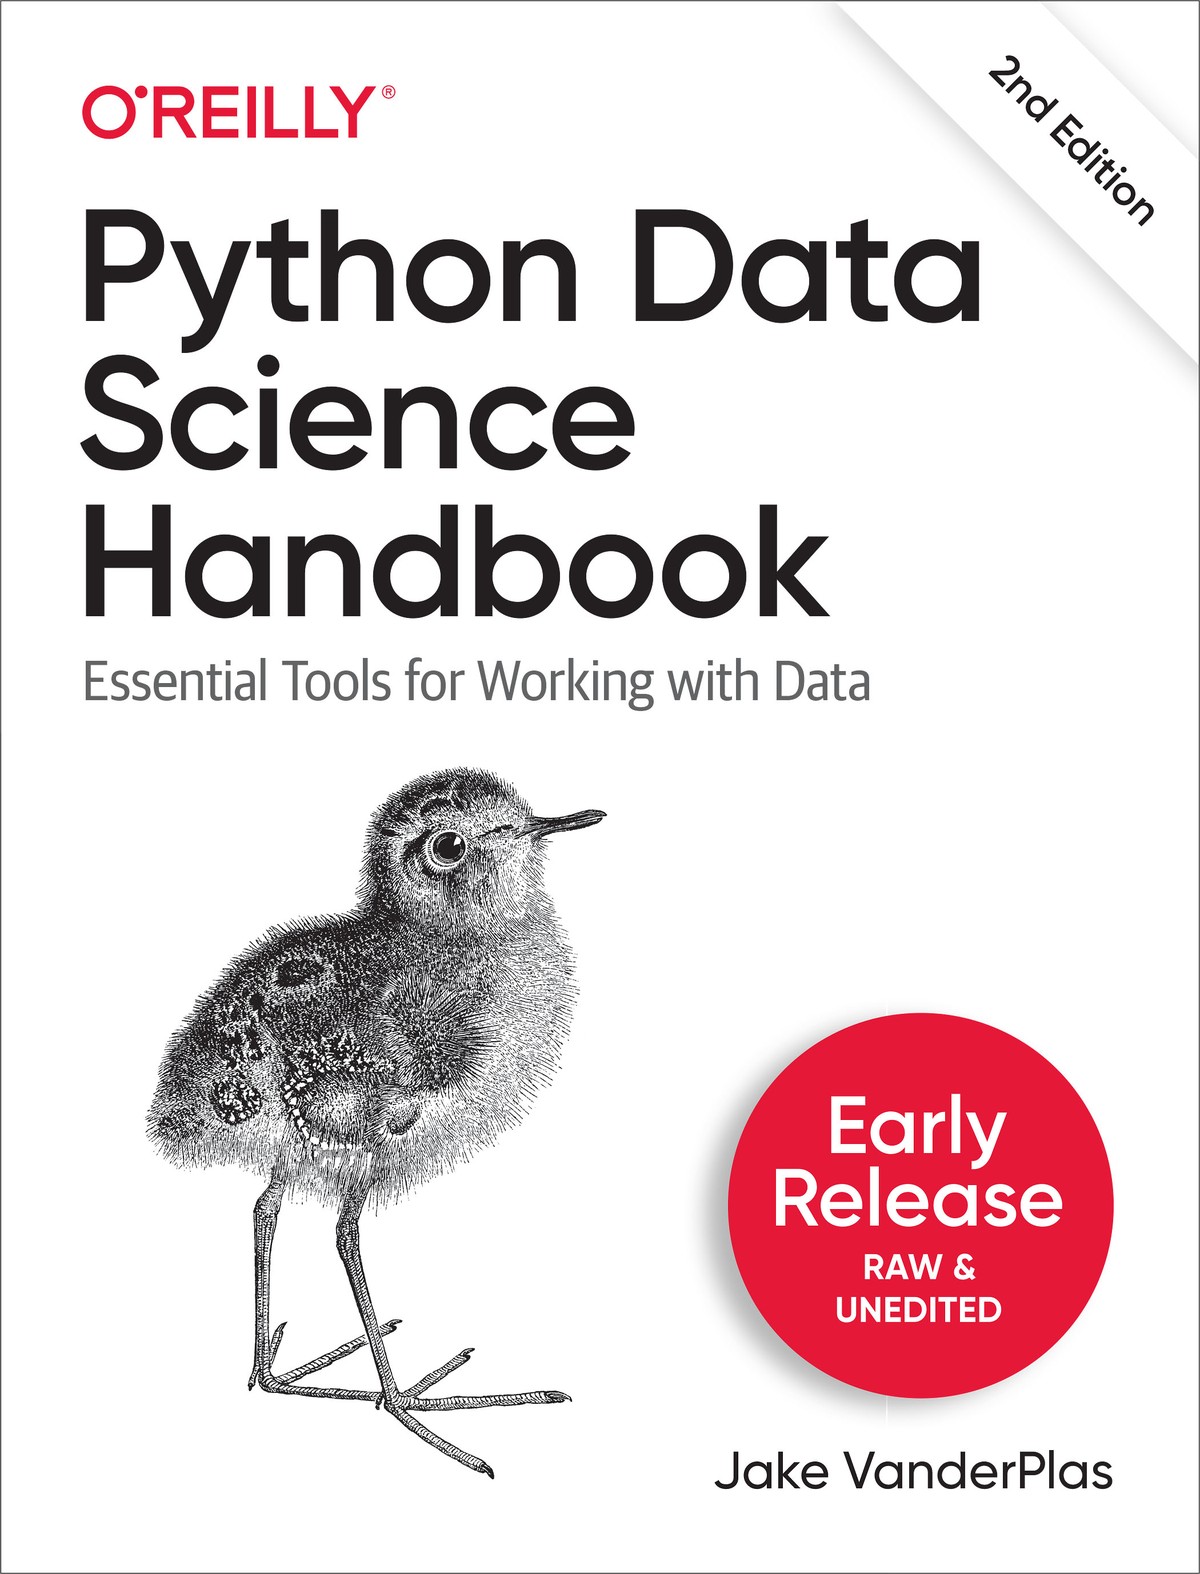 Python Data Science Handbook: Essential Tools for Working With Data